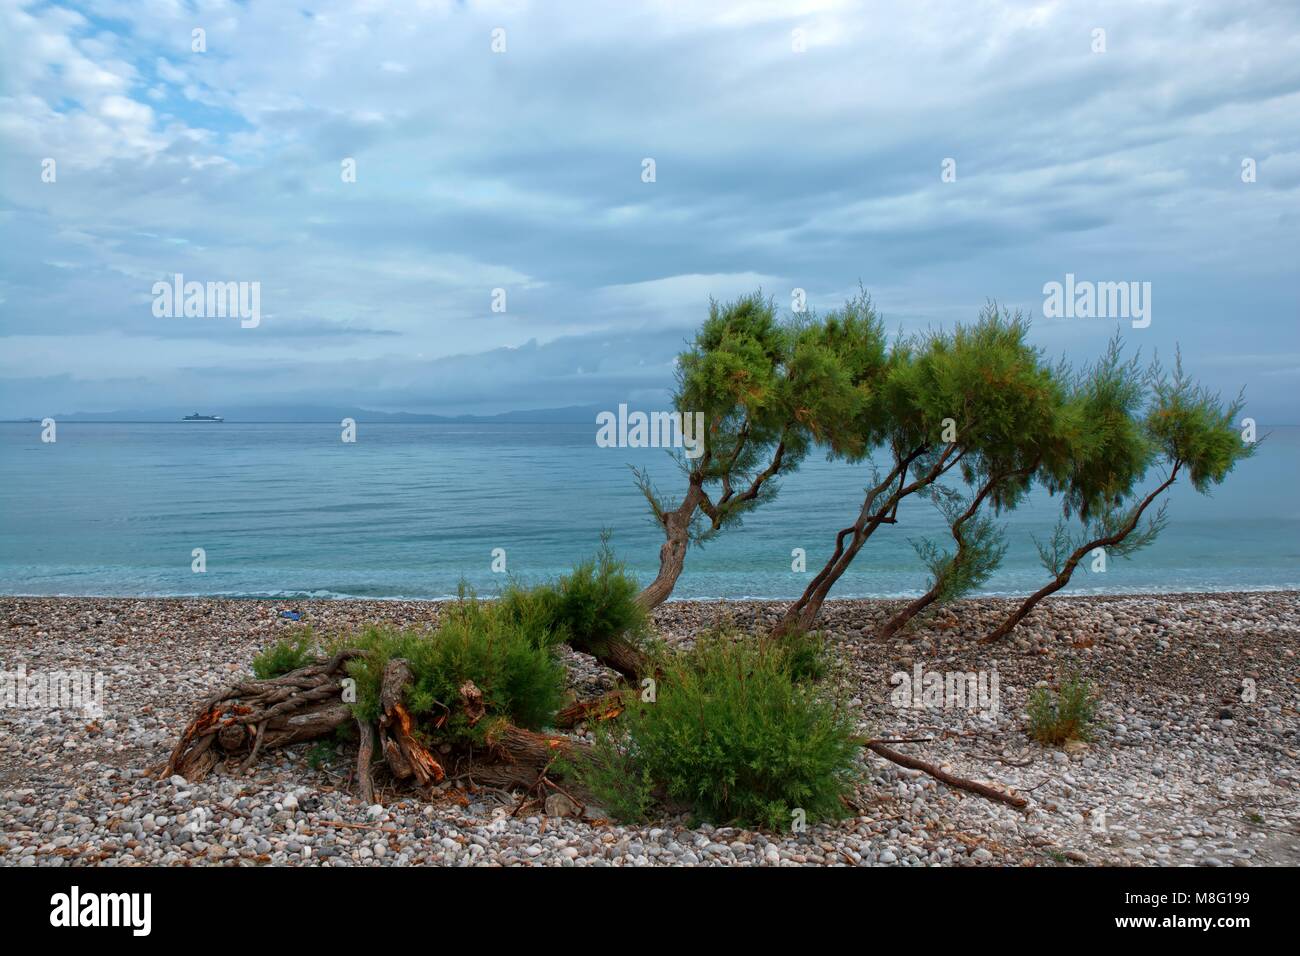 View of pebbly beach on cloudy day on western coast of Rhodes Island, Aegean Sea and Turkey coast in the background, Ialyssos, Greece Stock Photo